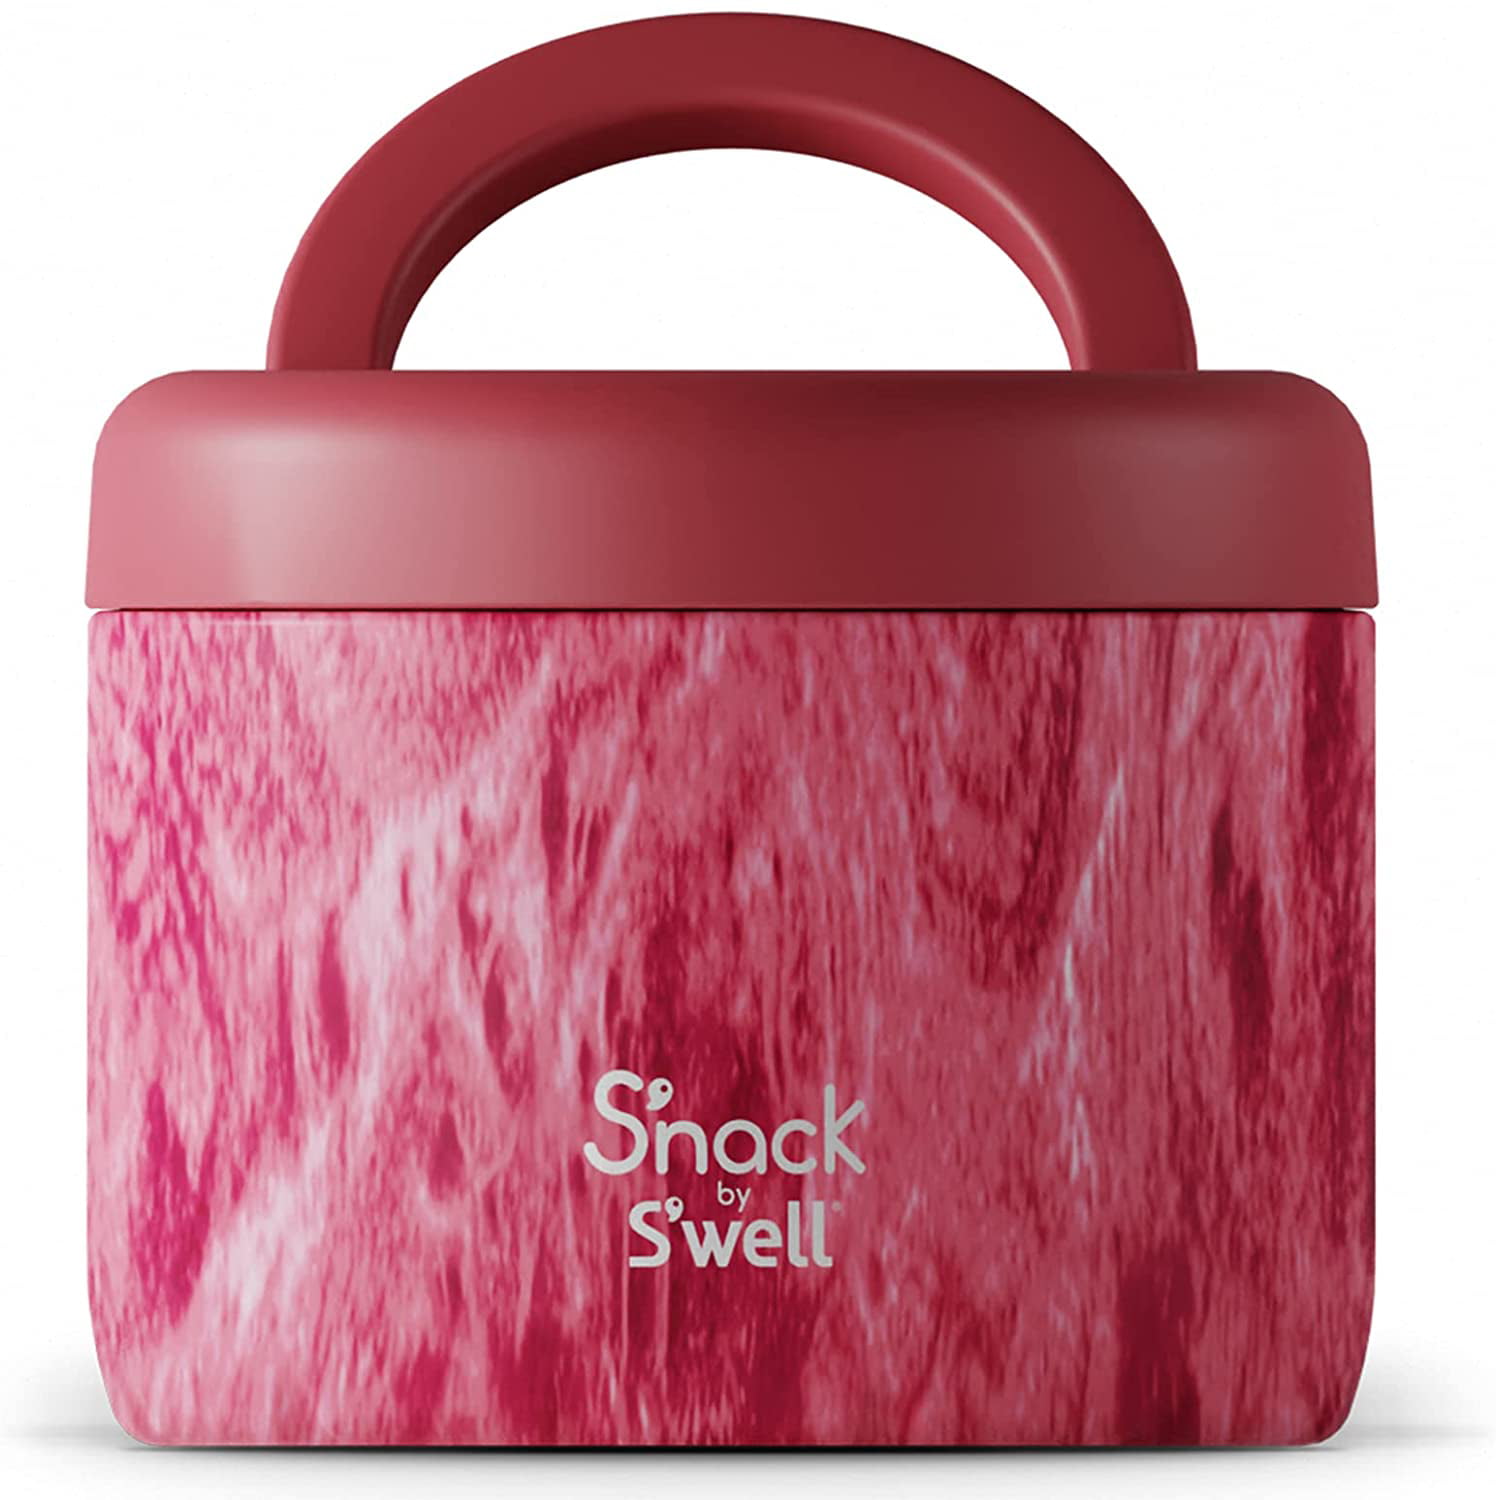 S'nack by S'well Stainless Steel Snack Containers